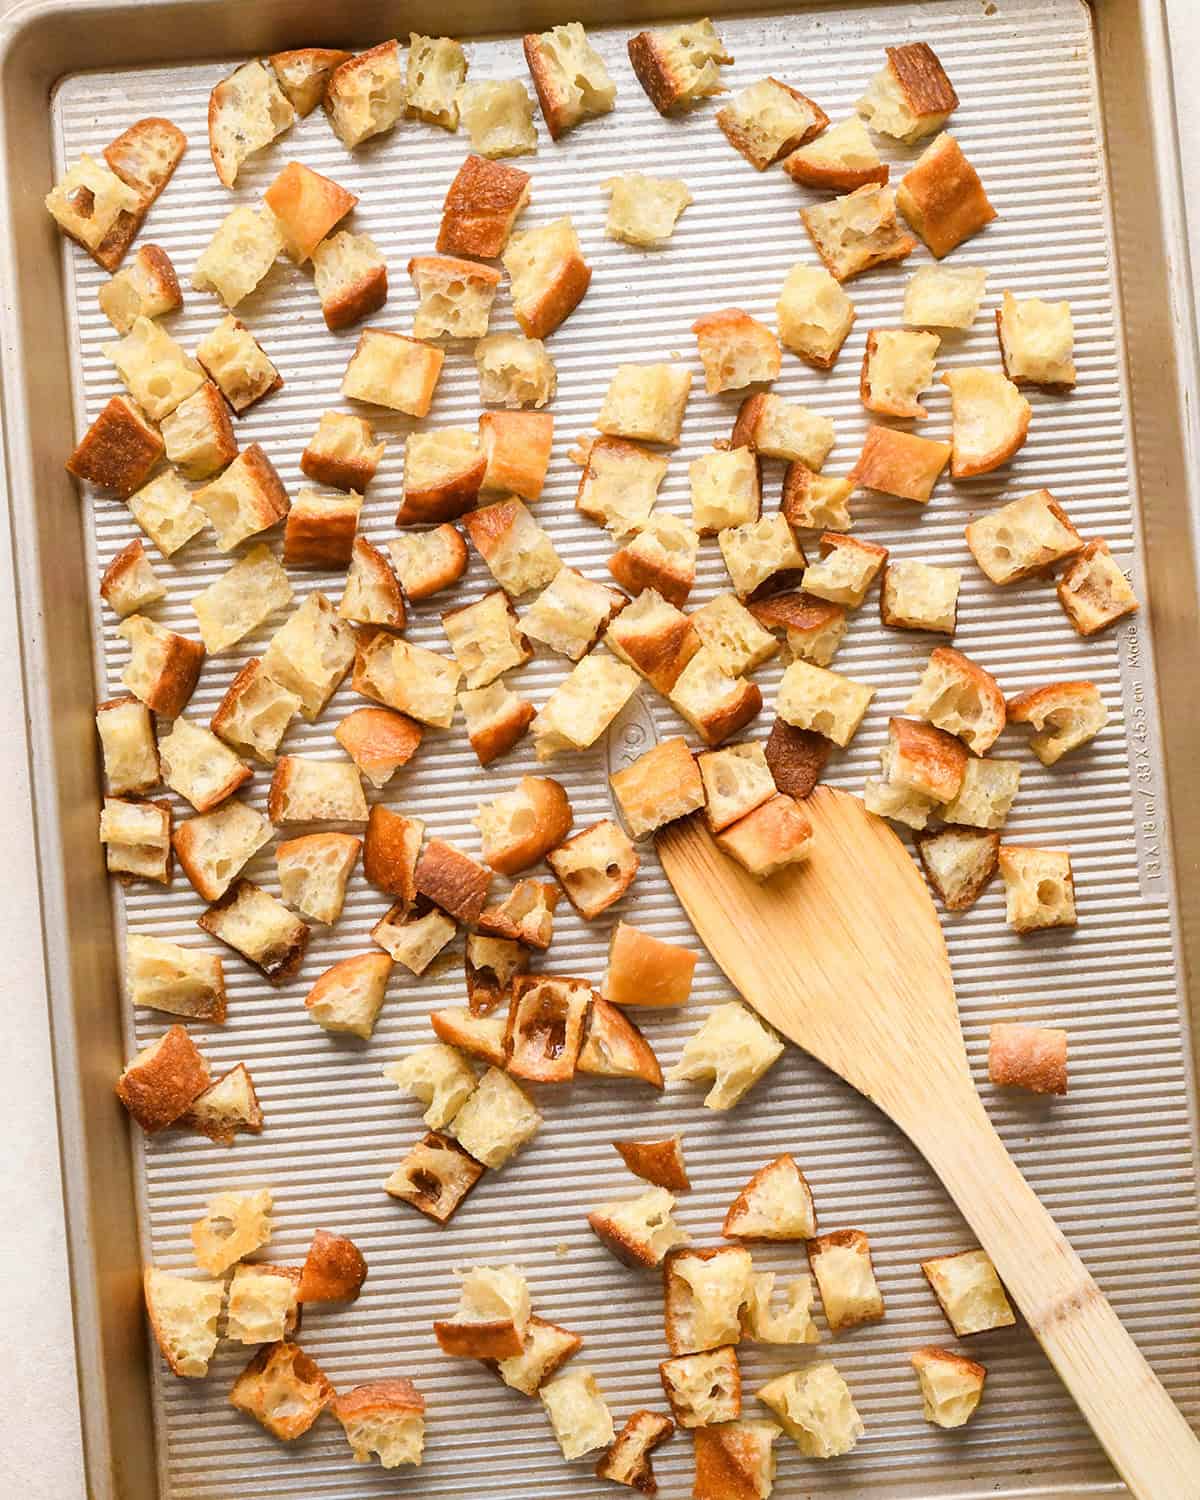 How to Make Croutons - stirring baked croutons on a baking sheet with a wooden spatula